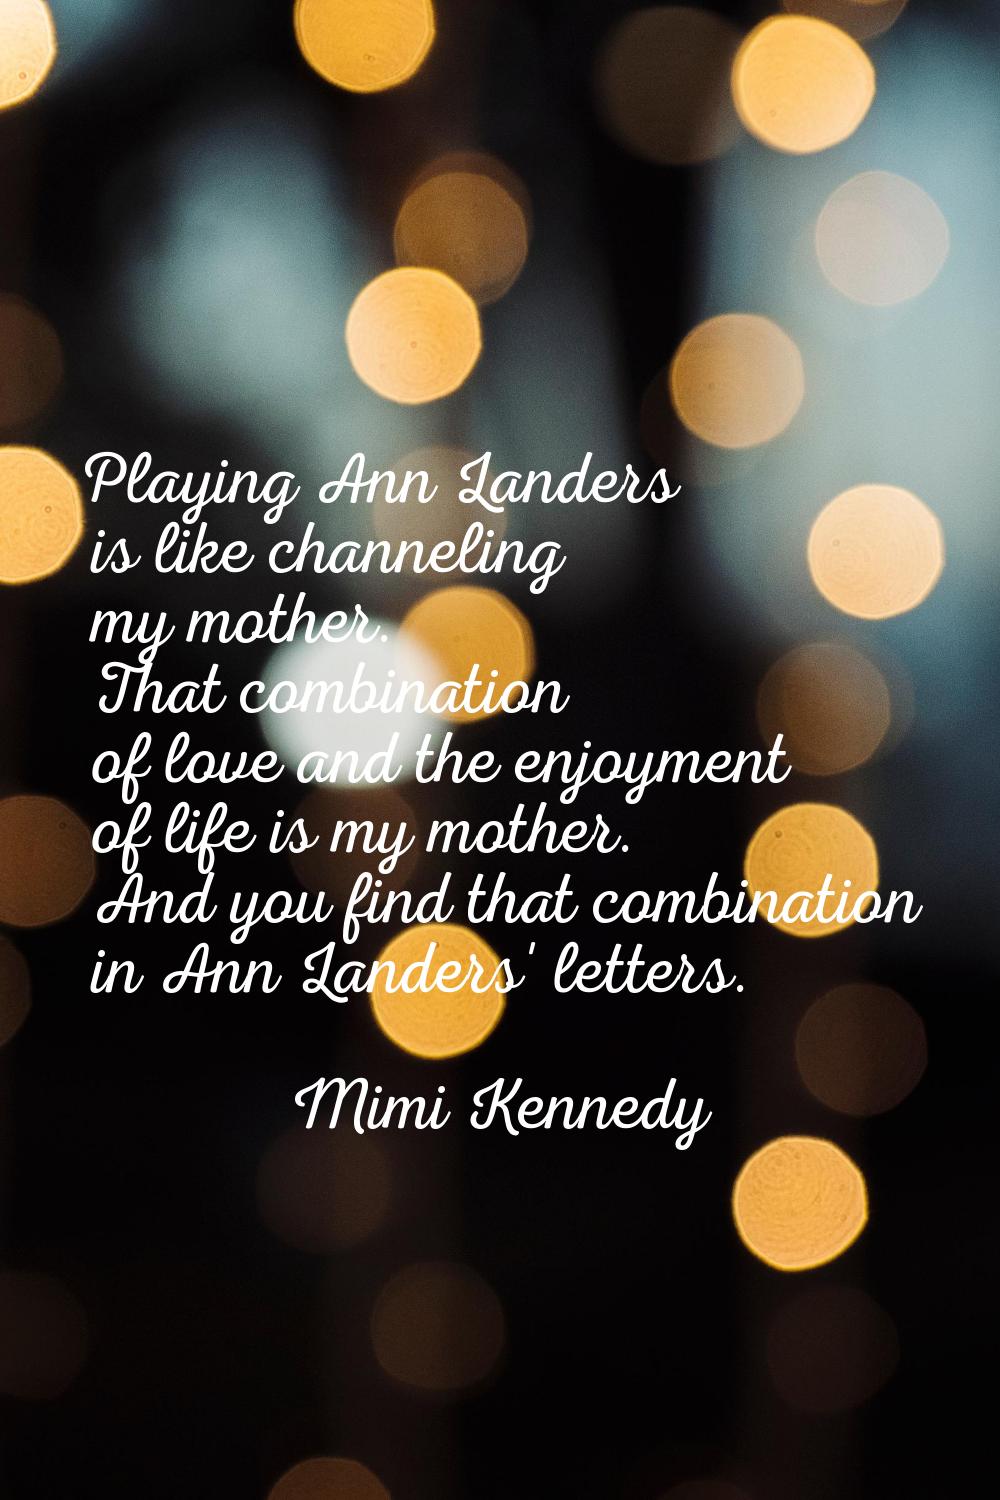 Playing Ann Landers is like channeling my mother. That combination of love and the enjoyment of lif